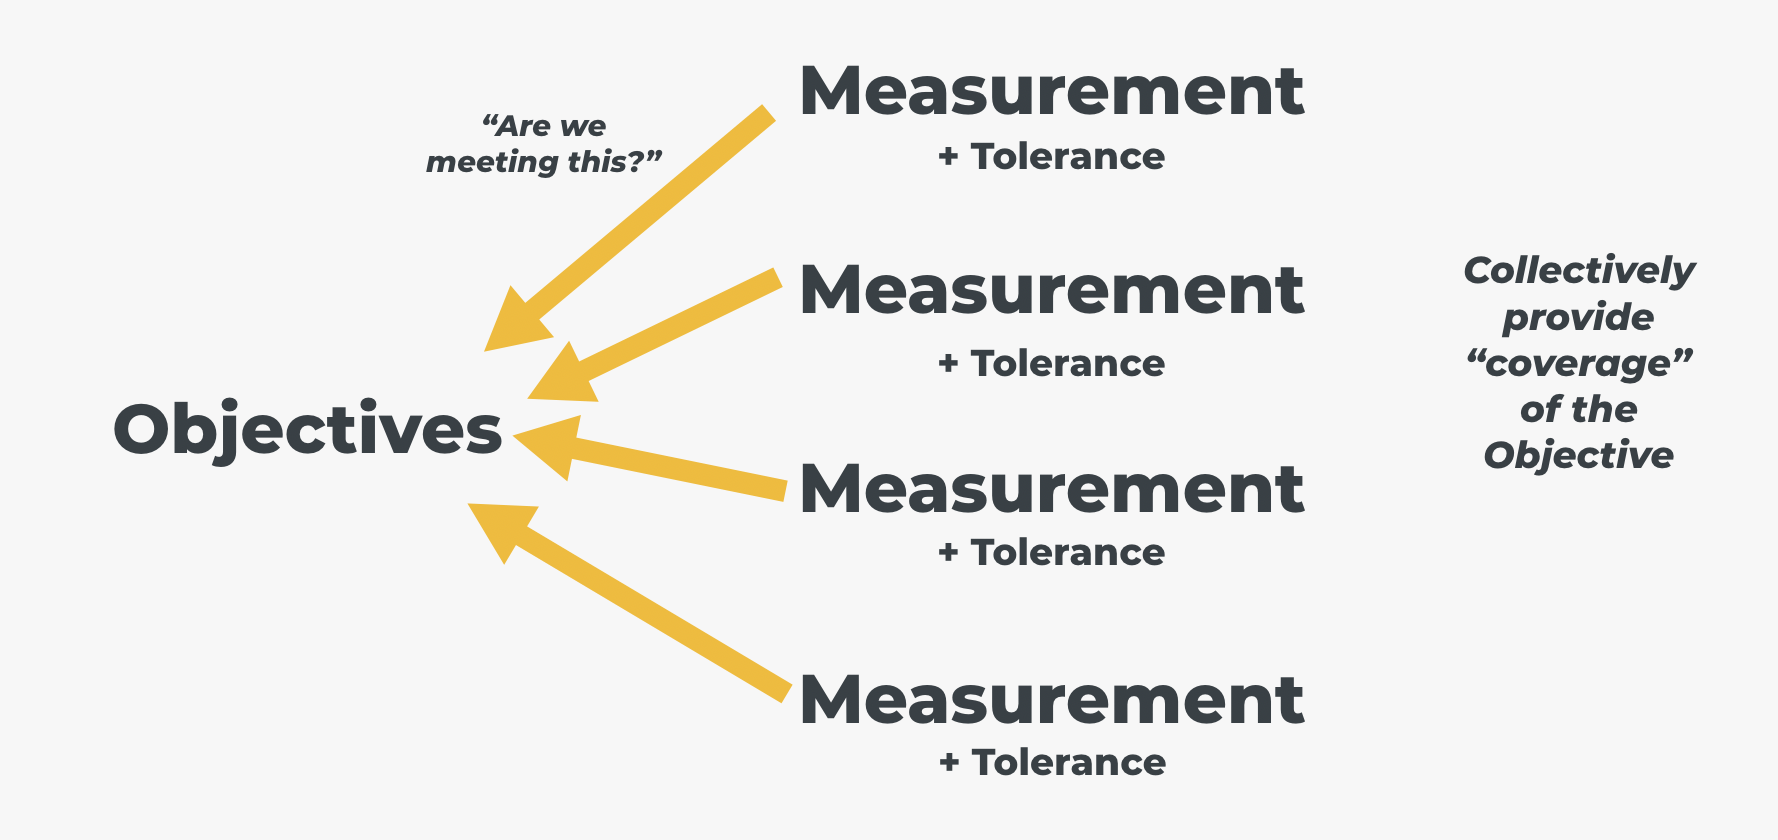 Measurements, with accompanying tolerances, provide "coverage" to answer the question, "Are we meeting the Objective?".